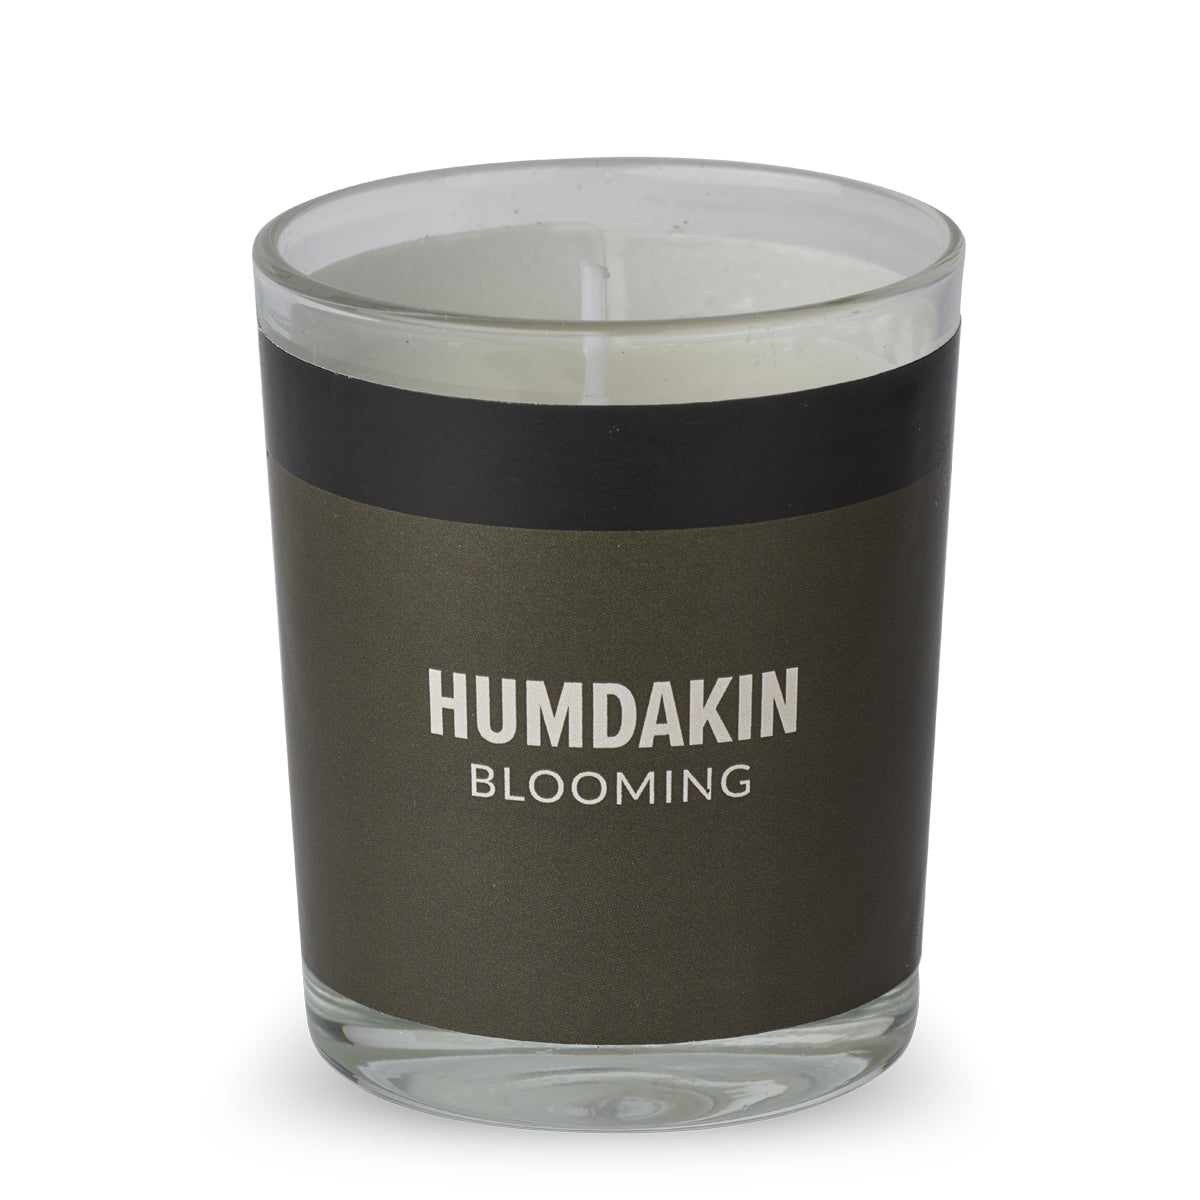 HUMDAKIN "Hygge and Authentic " - Scented Candles - 4 pack Candle 00 Neutral/No color